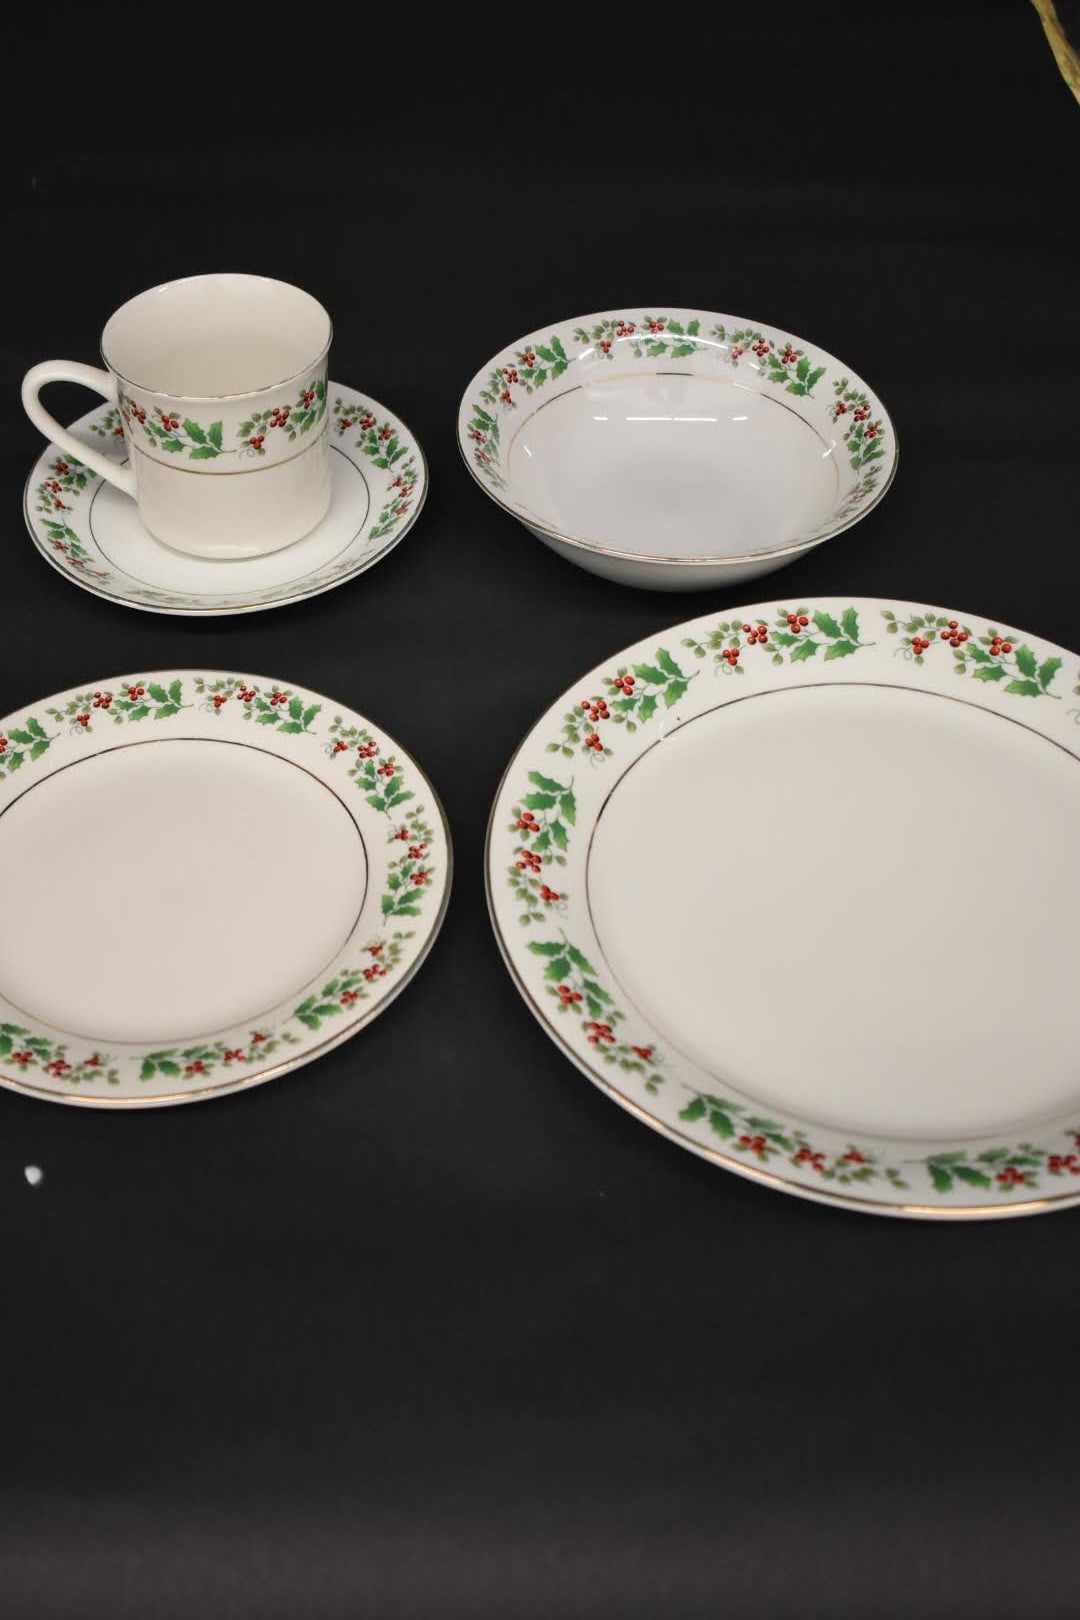 Holiday Holly Pattern - Mid Century Gold Trim Porcelain Fine China - 5 Piece Dinner Set